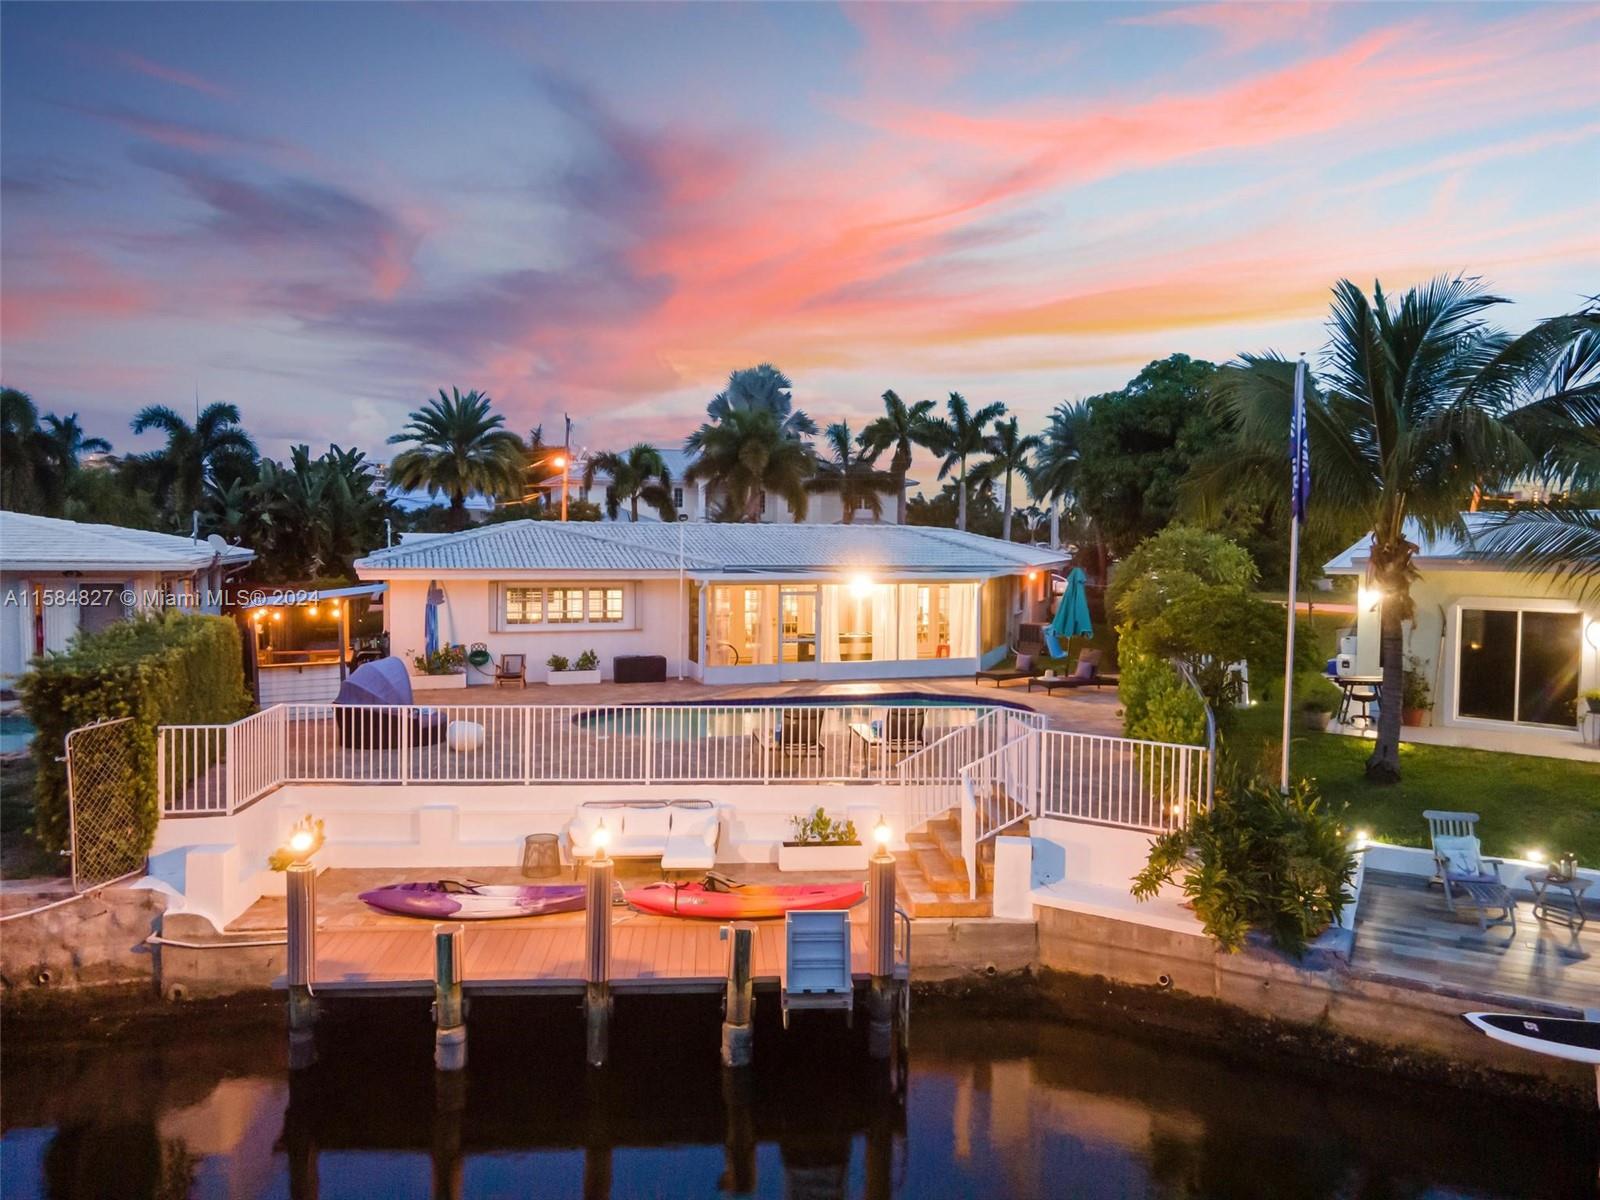 This stunning house offers one story, 3 bedrooms/2 bathrooms, a pool, a dock for boats of up to 35 feet, and incredible sunsets. The best long view of the channel, deep waters without fixed bridges. Sea wall and cement spring with an electric point and water. Terrific pool in front of the channel with a lot of relaxing space and an outdoor bar covered with a television. A screened game room next to the pool. Beautiful and spacious stylish new renovated kitchen. Both bathrooms are fully updated with newer dresses, bathrooms, and accessories, they look so elegant! Washing and dryer washing space next to the kitchen and storage space with the water heater in front of it. Attached garage with automatic door and sink. New asphalt on the driveway. Equal housing opportunities.